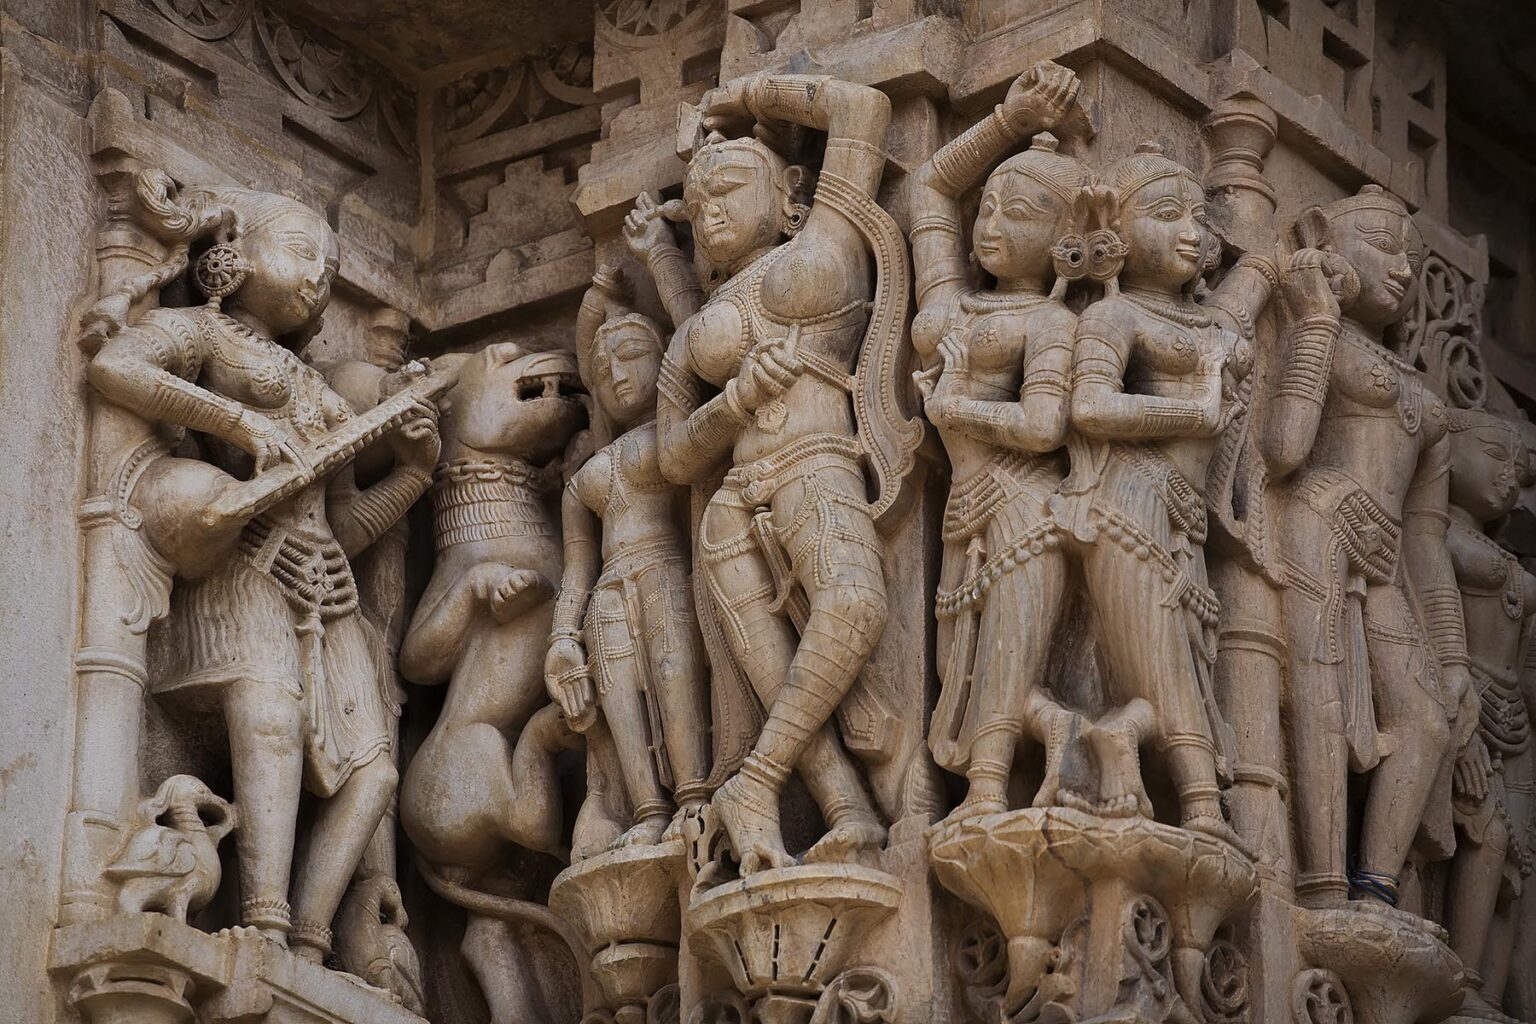 Carved MUSICIAN and APSARAS decorate the JAGADISH TEMPLE which was built in 1651by Maharaja Jagat Singh in honor of Vishnu as Jagannath - UDAIPUR, RAJASTHAN, INDIA